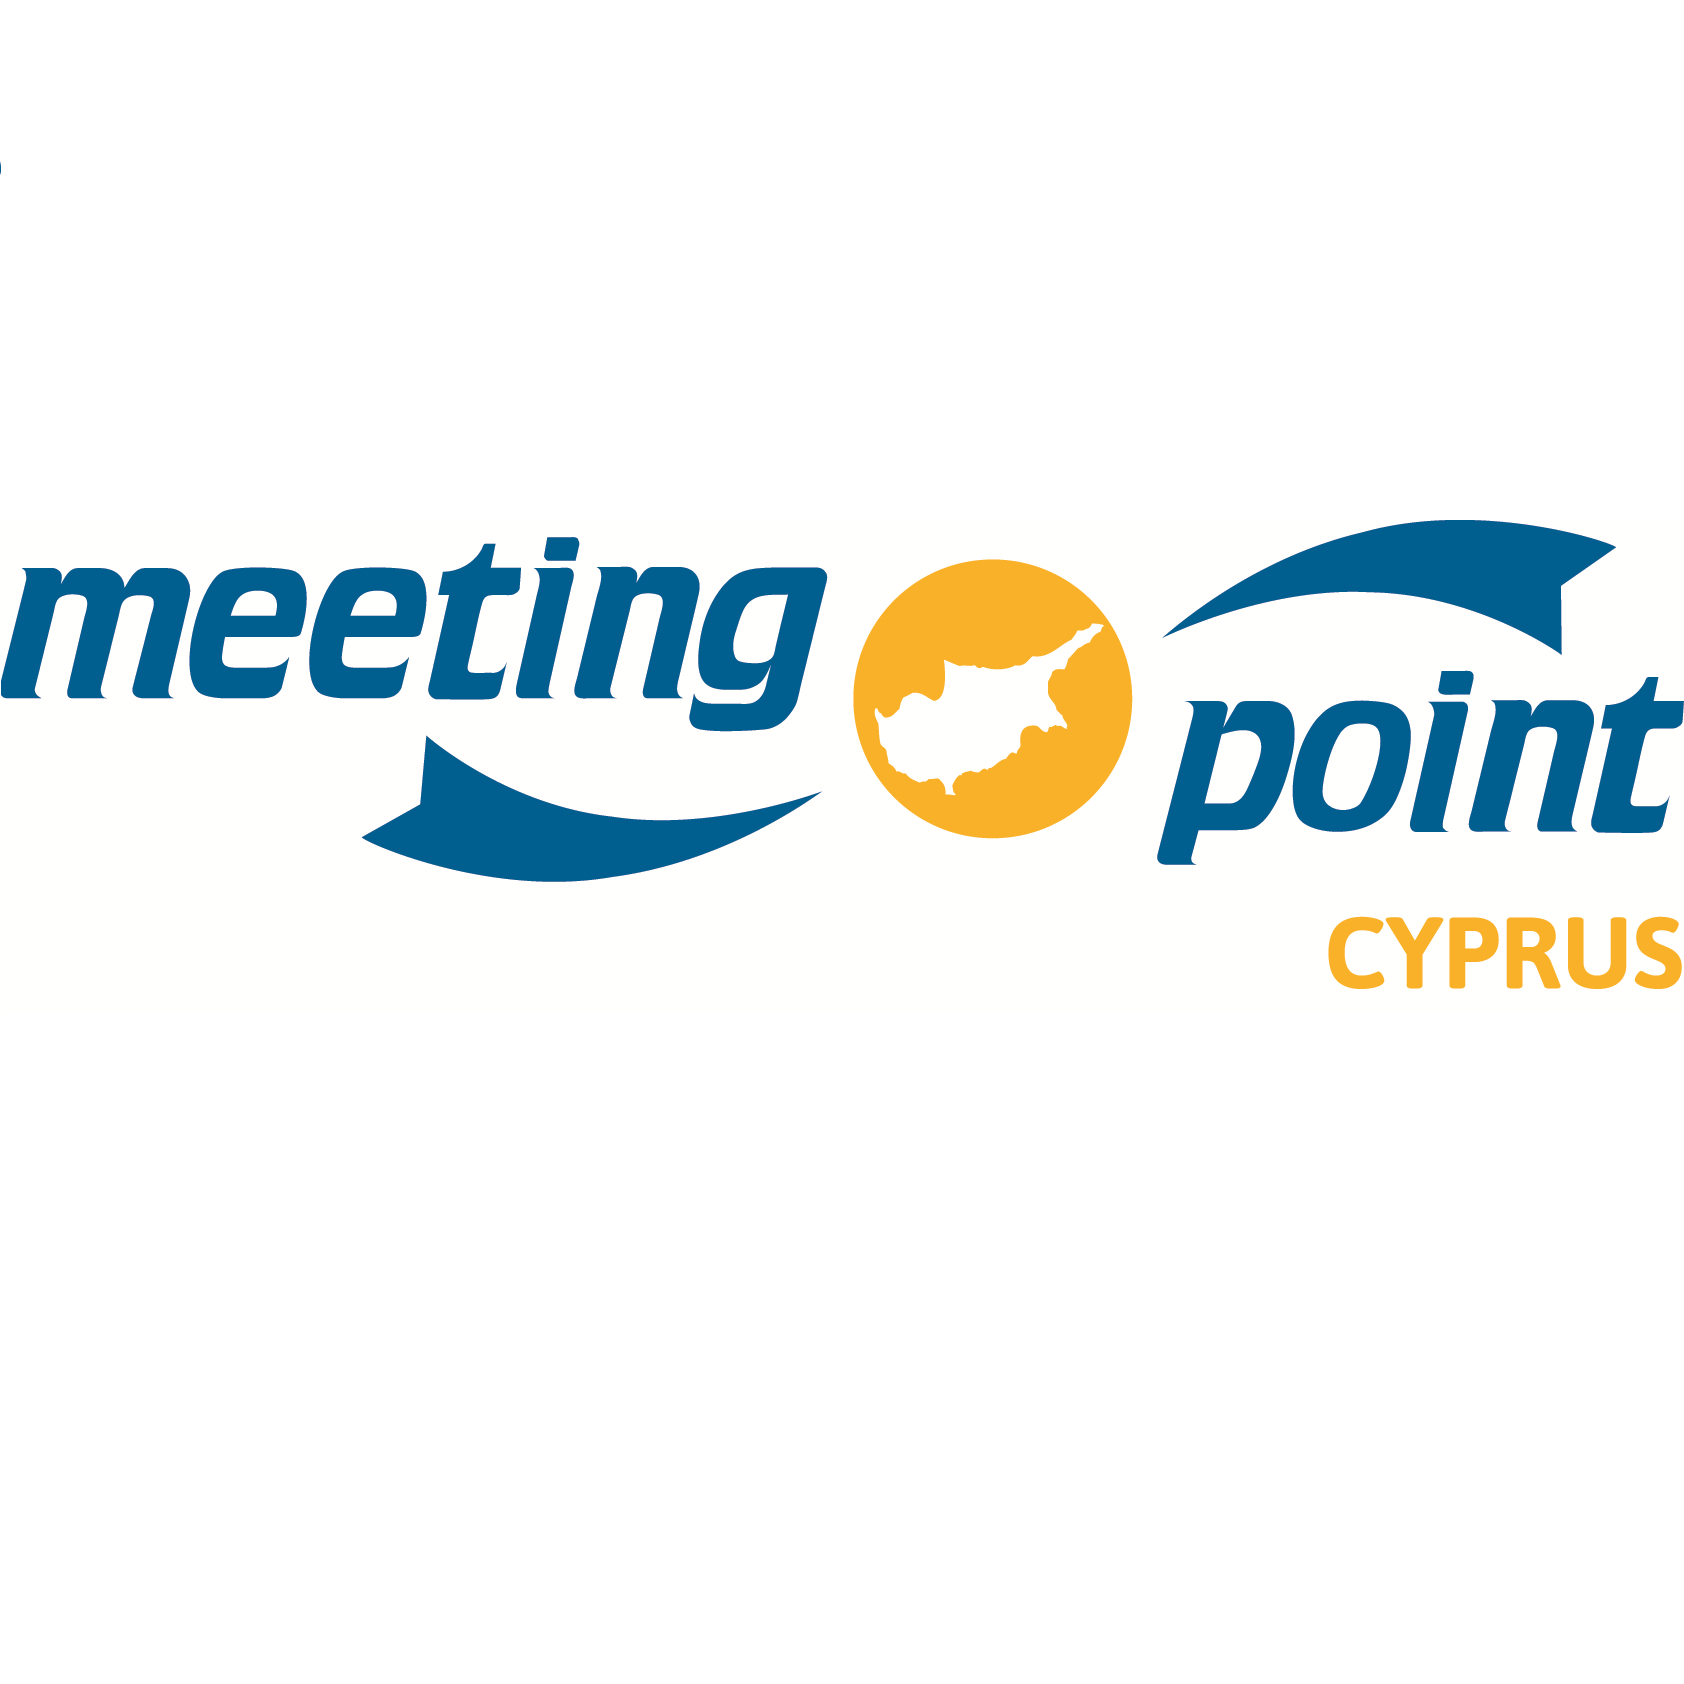 Meeting Point Cyprus